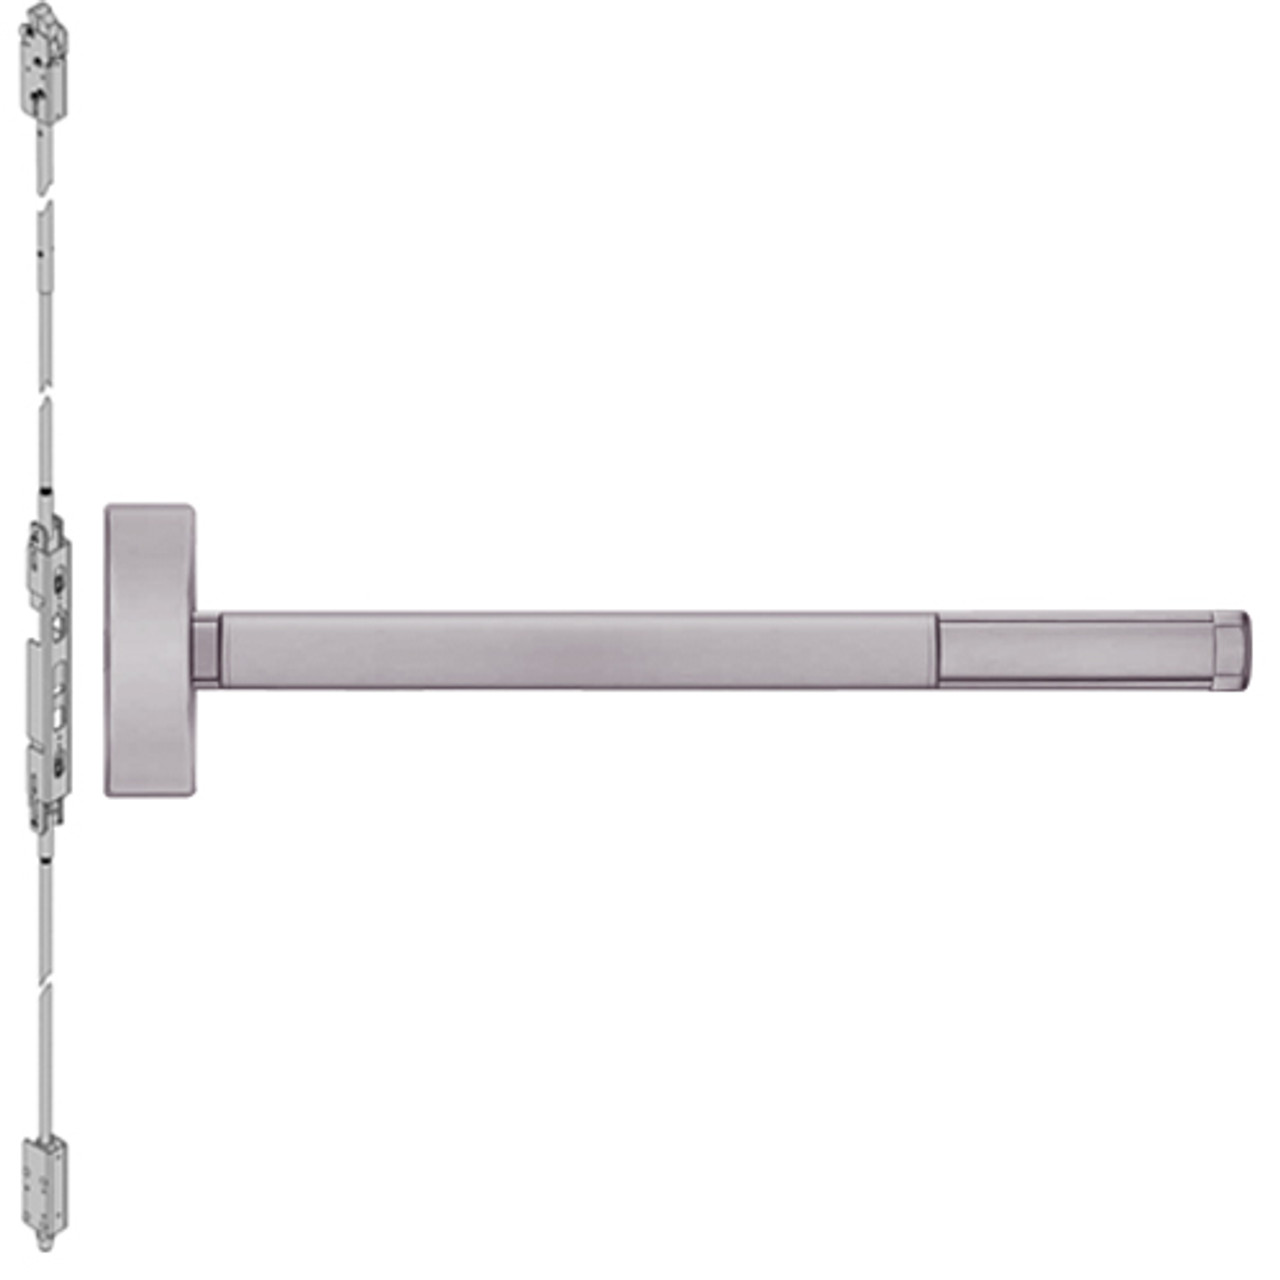 2802LBRCD-630-36 PHI 2800 Series Non Fire Rated Concealed Vertical Rod Exit Device Prepped for Dummy Trim in Satin Stainless Steel Finish